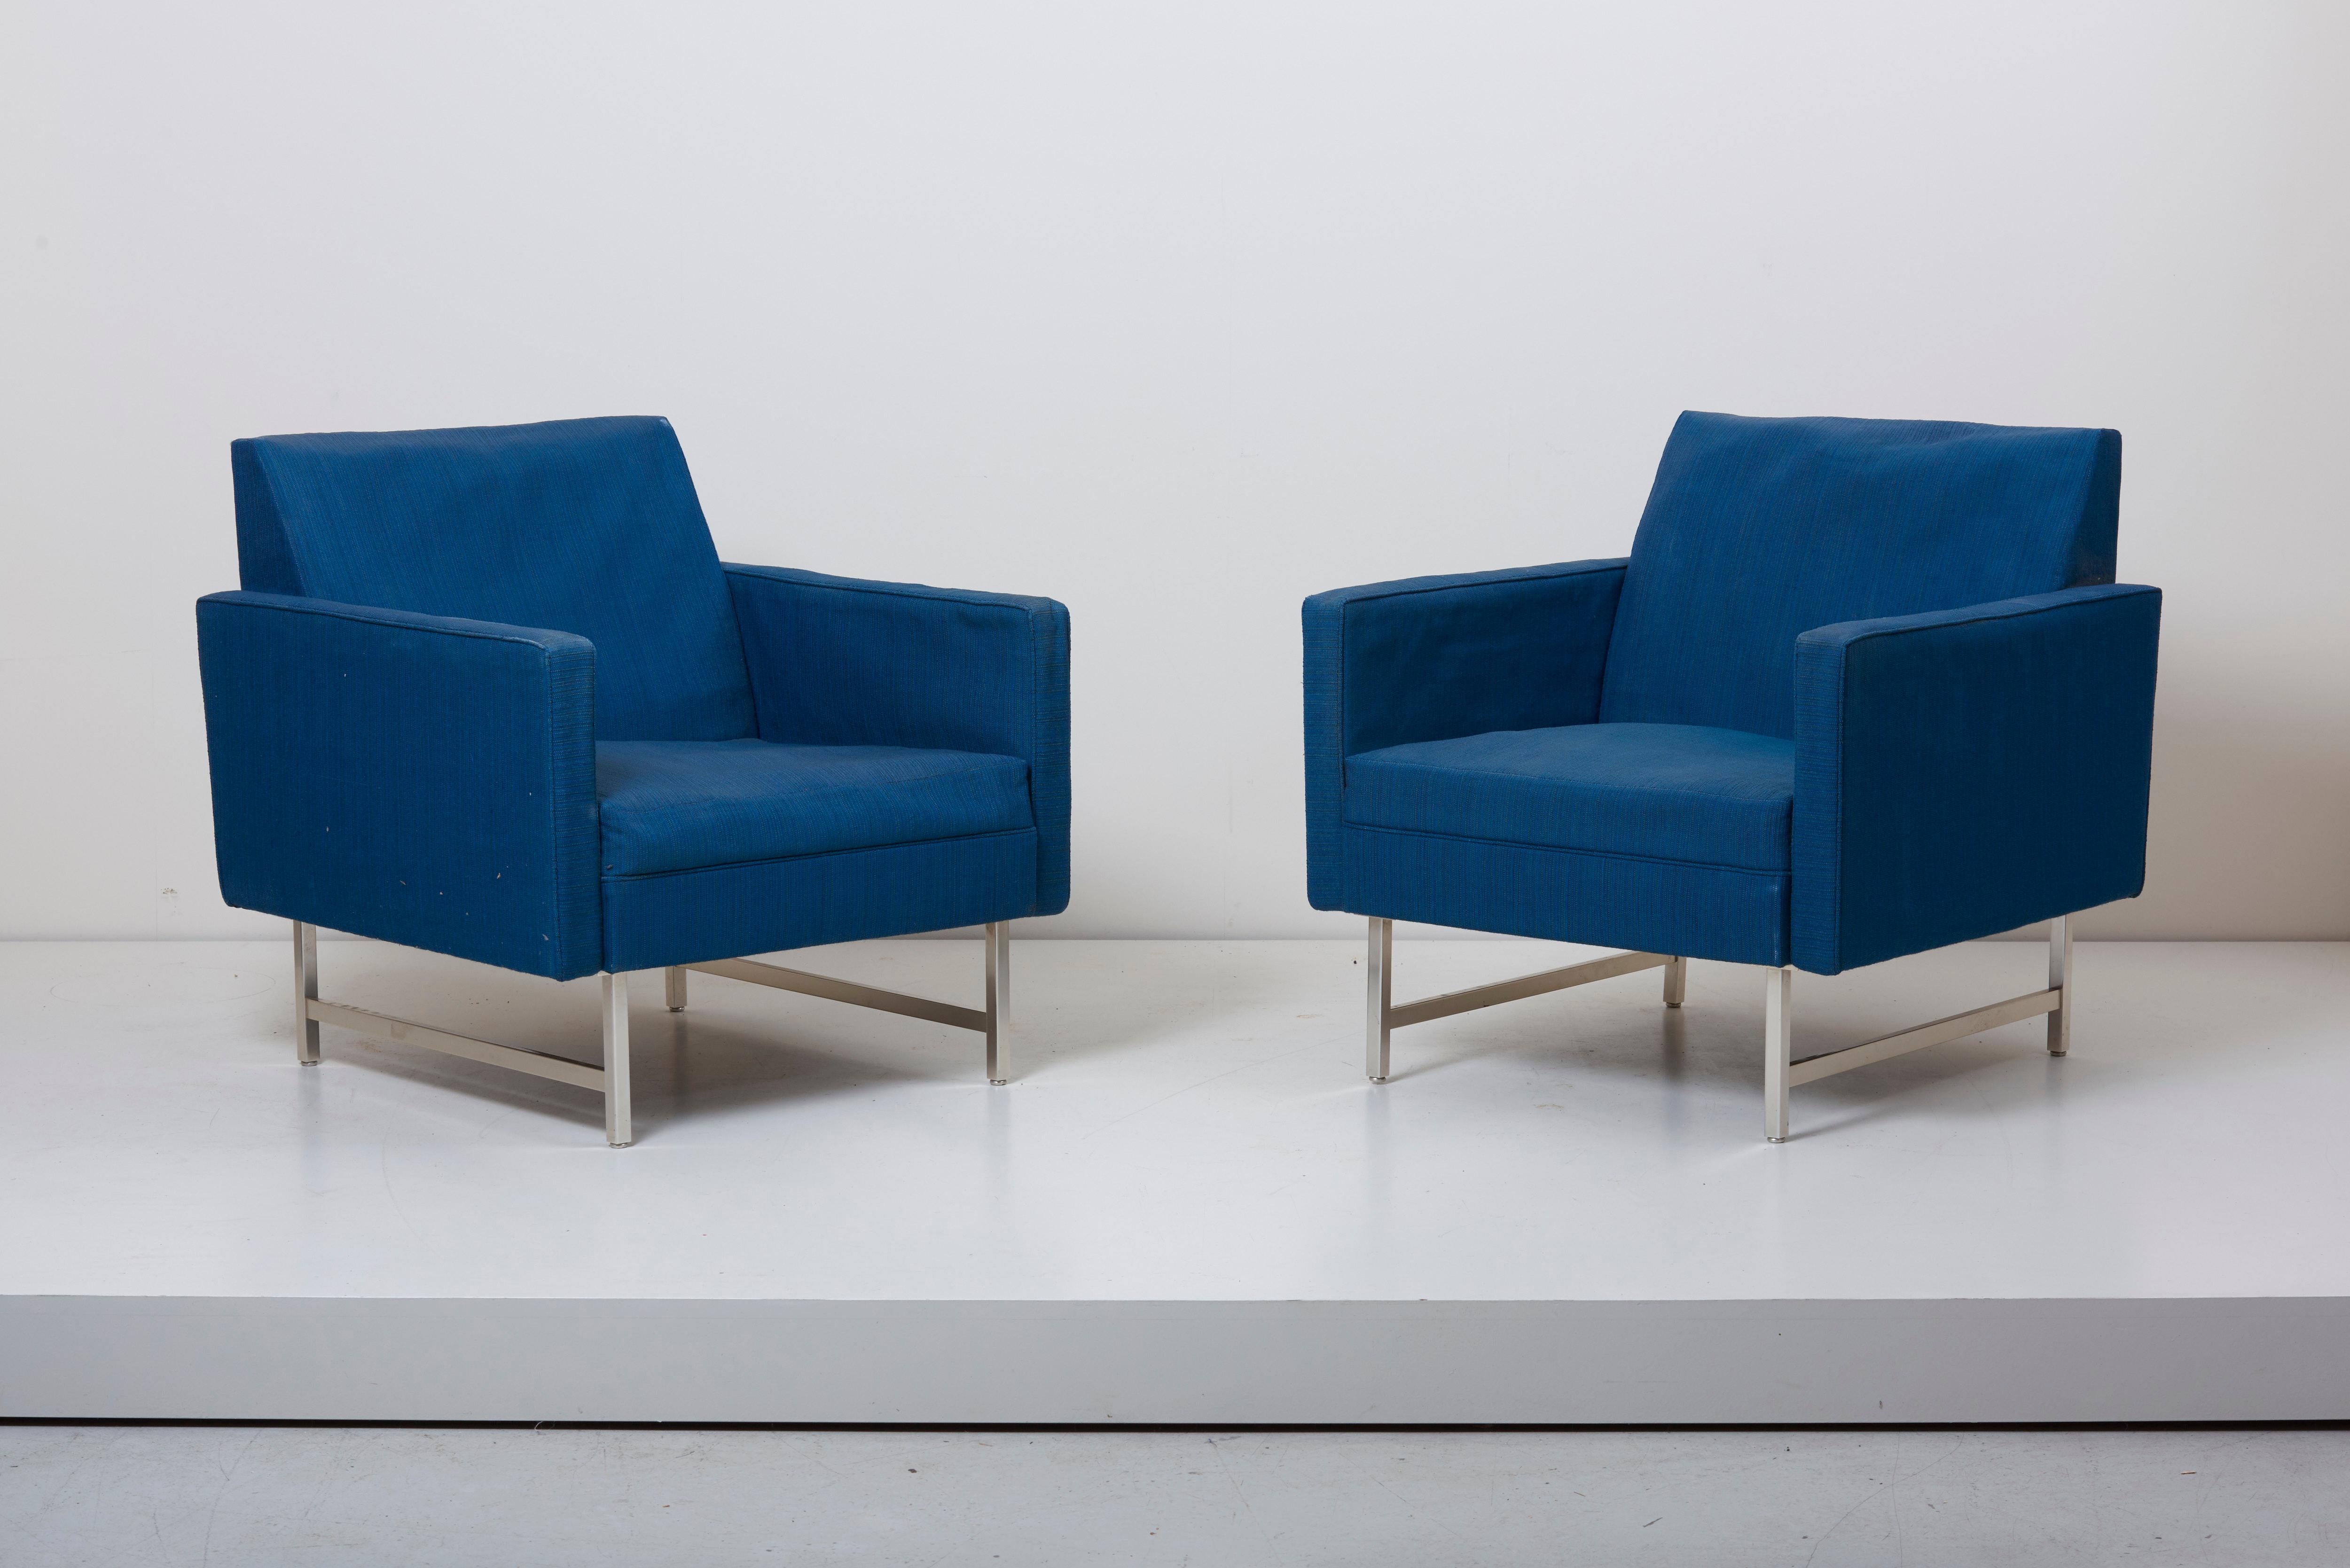 Pair of Lounge Chairs designed by Paul McCobb for Directional / WK Möbel, Germany, 1960s. The Lounge chairs are in original condition and need a rework. The chairs comes with brass metal legs, upholstery needed.